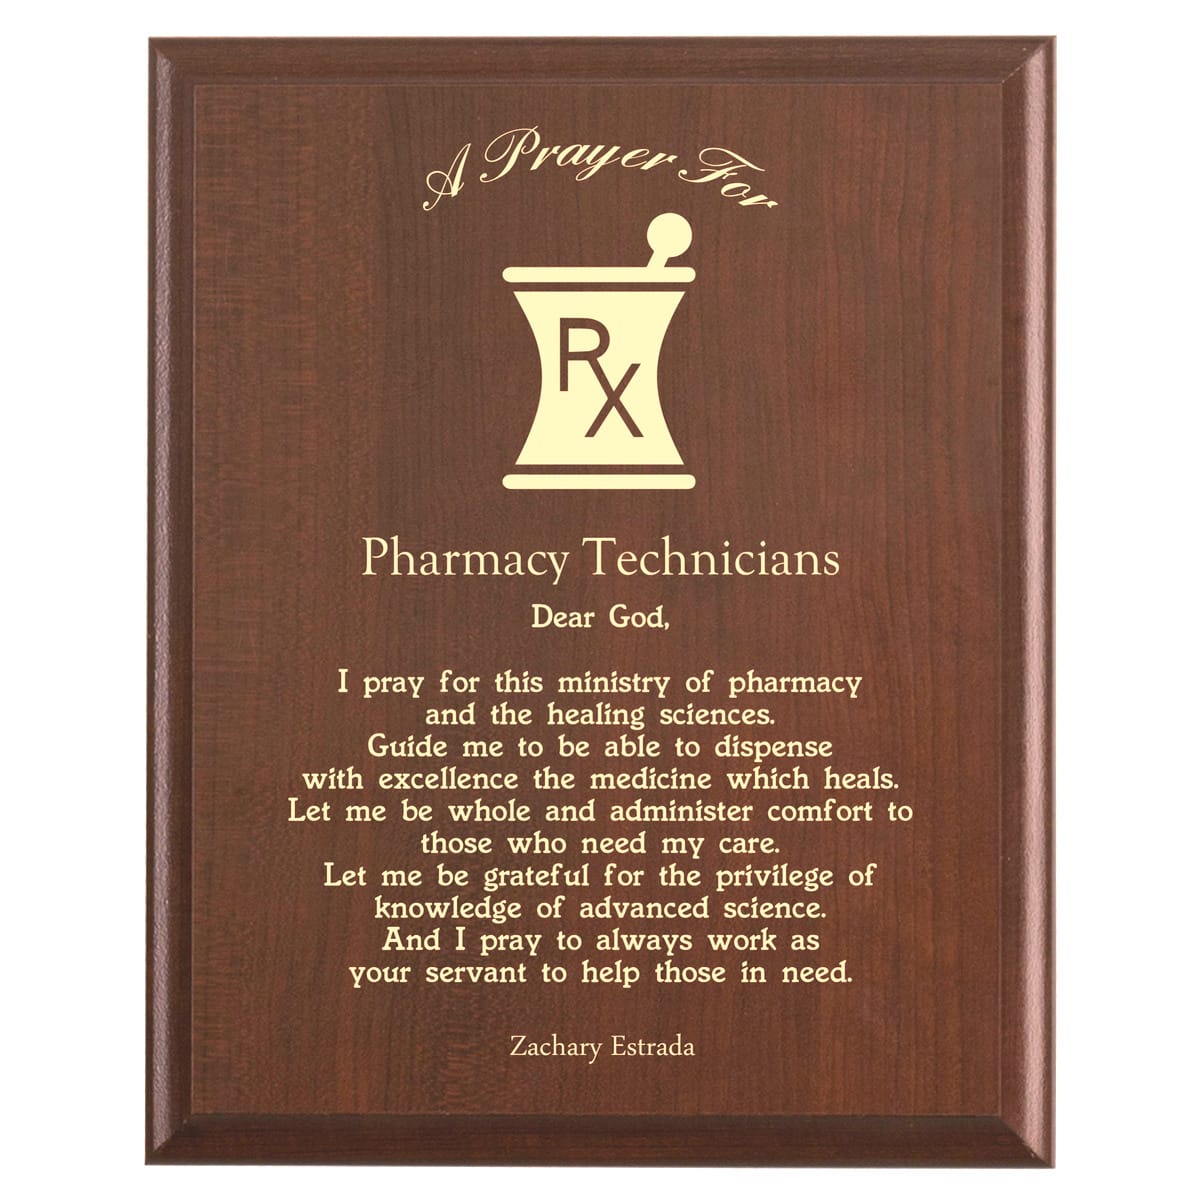 Plaque photo: Pharmacy Technician Plaque design with free personalization. Wood style finish with customized text.